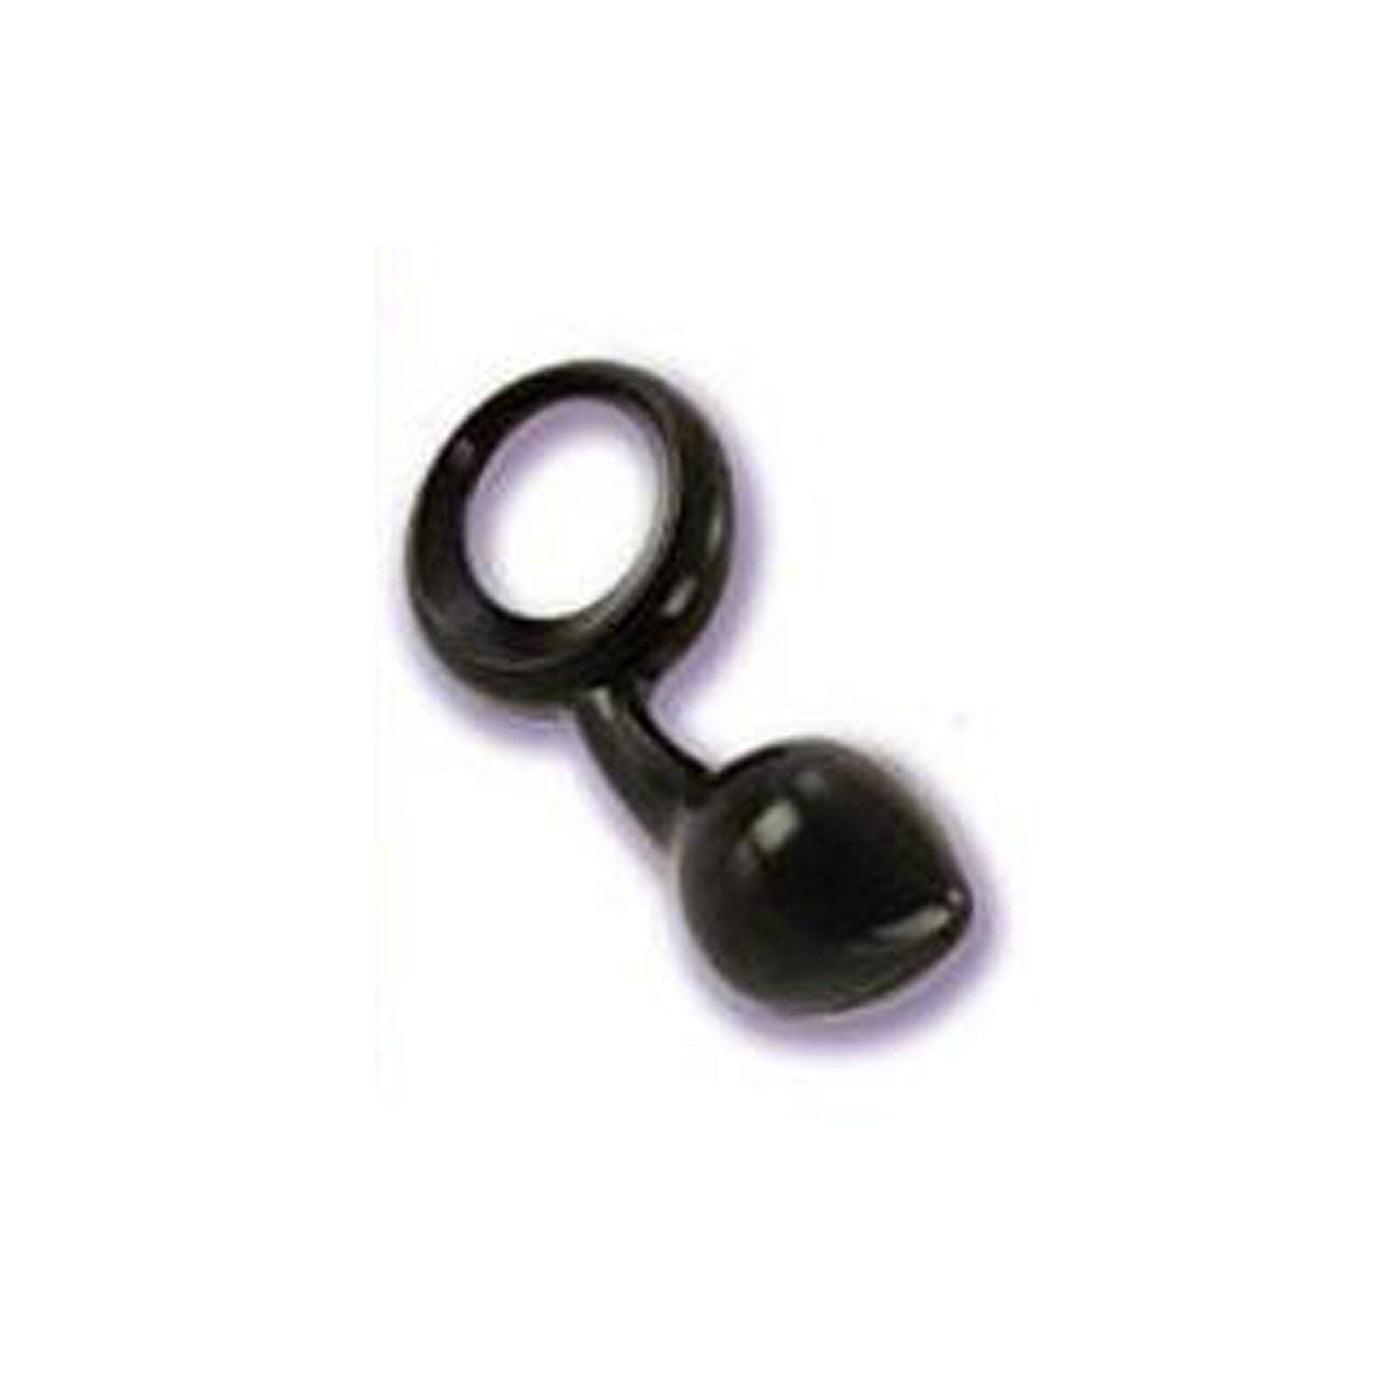 Love Pacifier Advanced Silicone Anal Probe